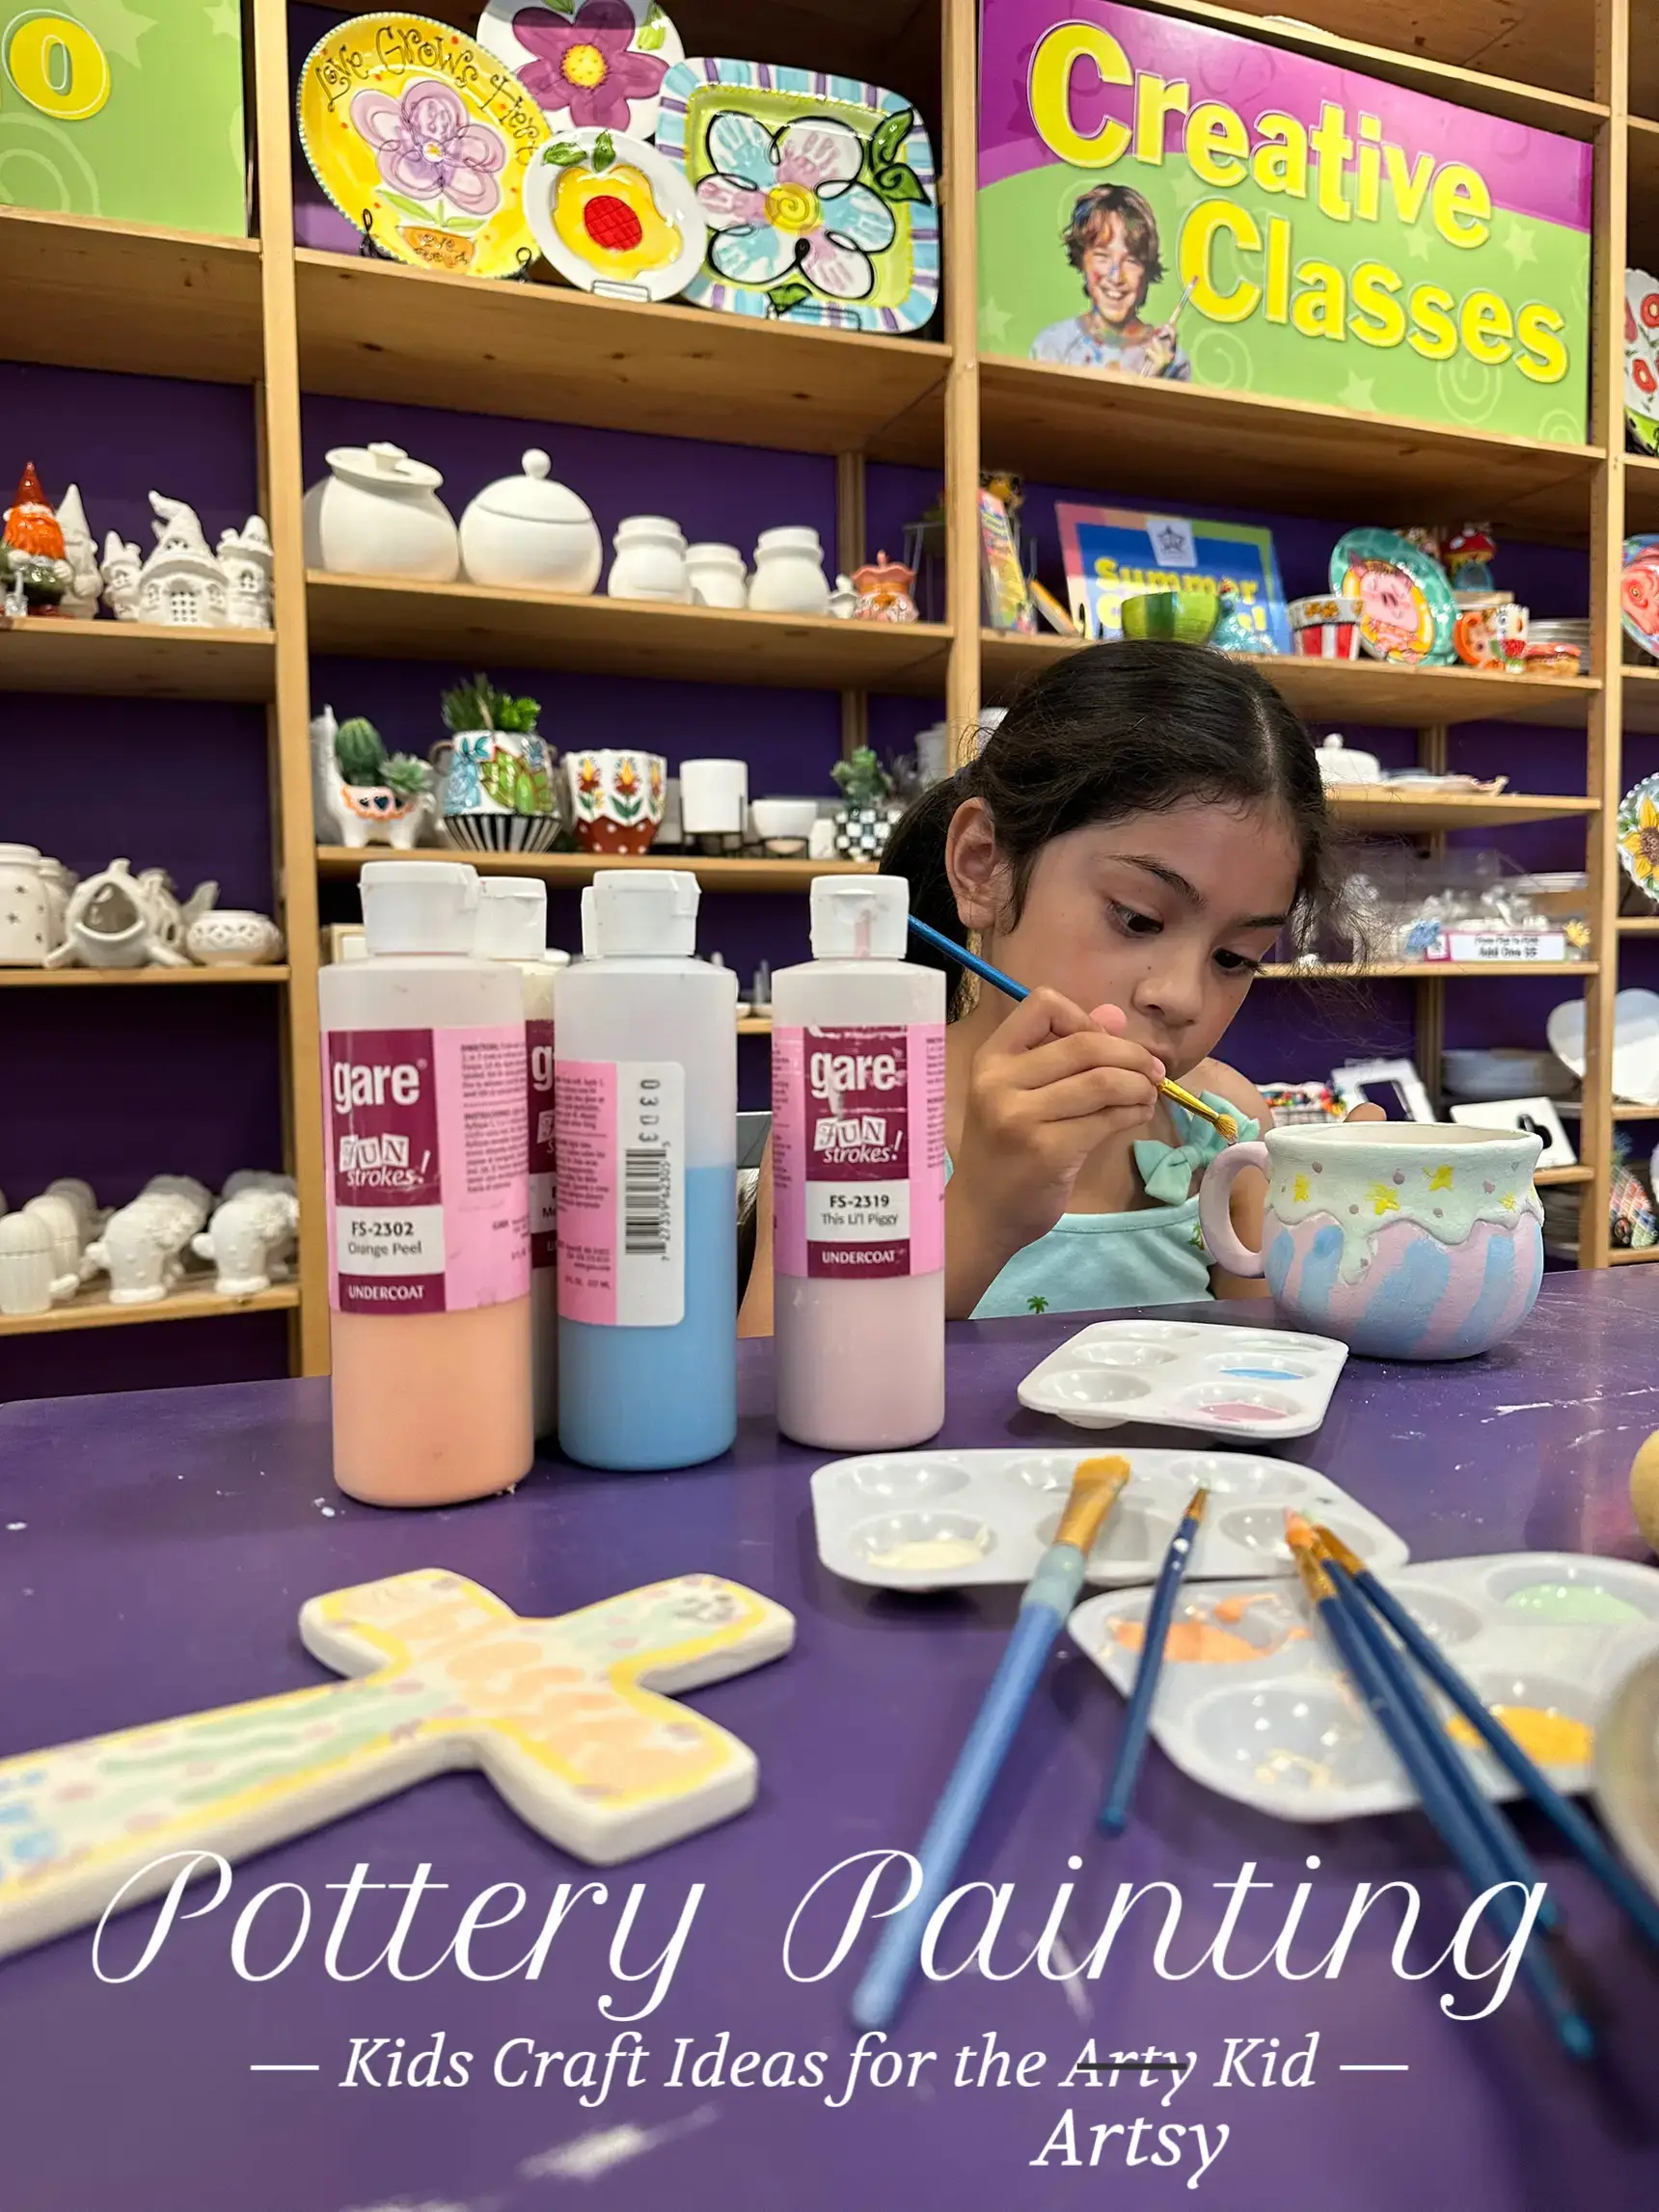 Painting Pottery 101 🎨🪴, Gallery posted by vera kent, art